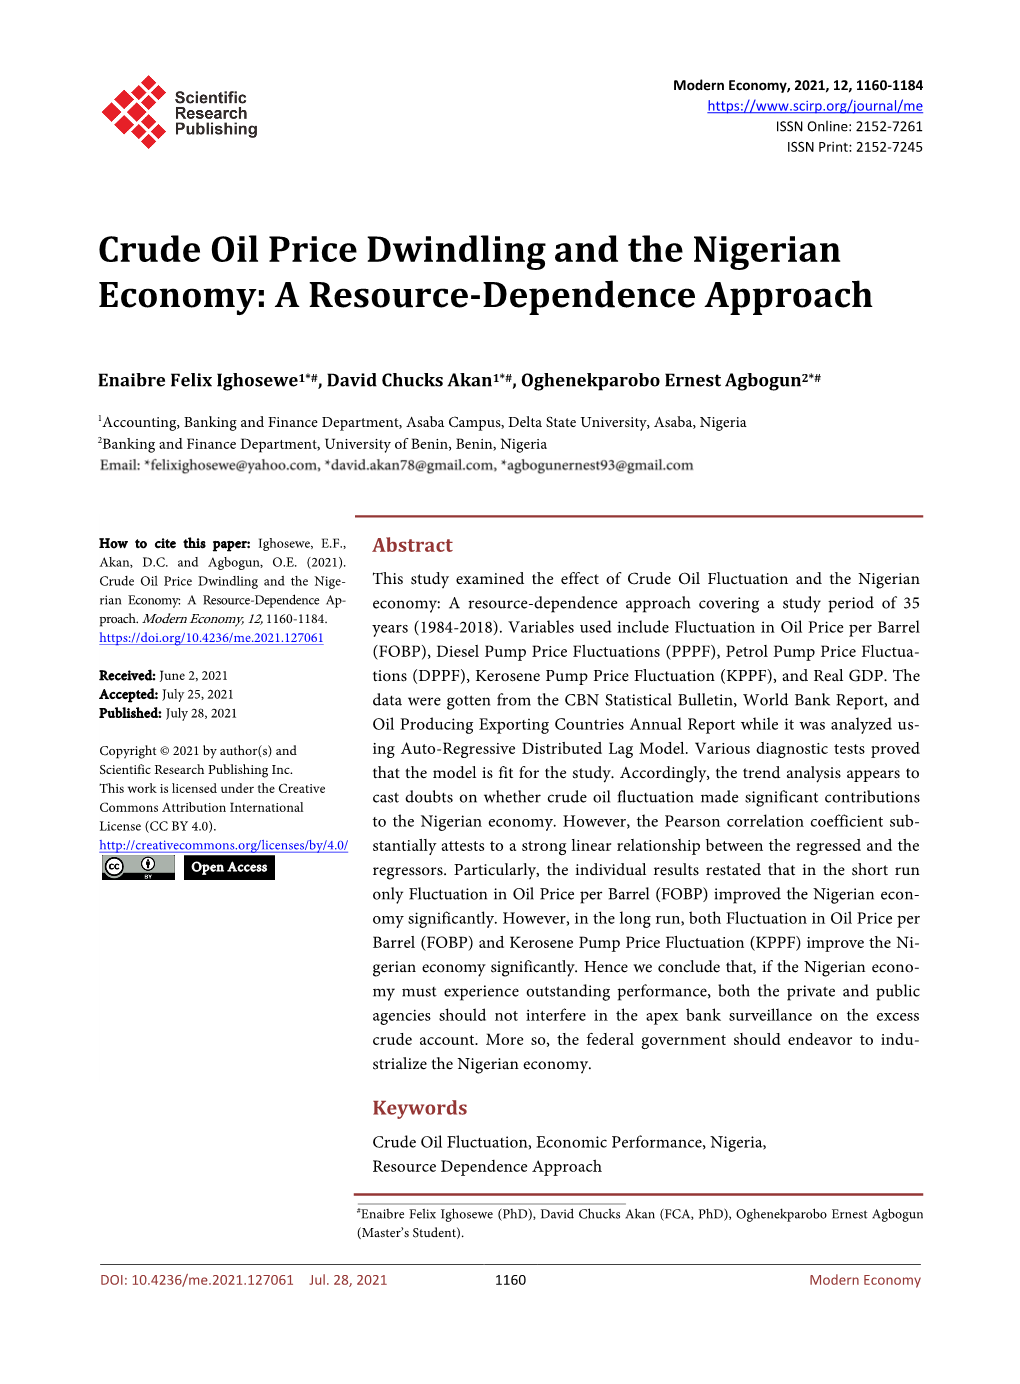 Crude Oil Price Dwindling and the Nigerian Economy: a Resource-Dependence Approach